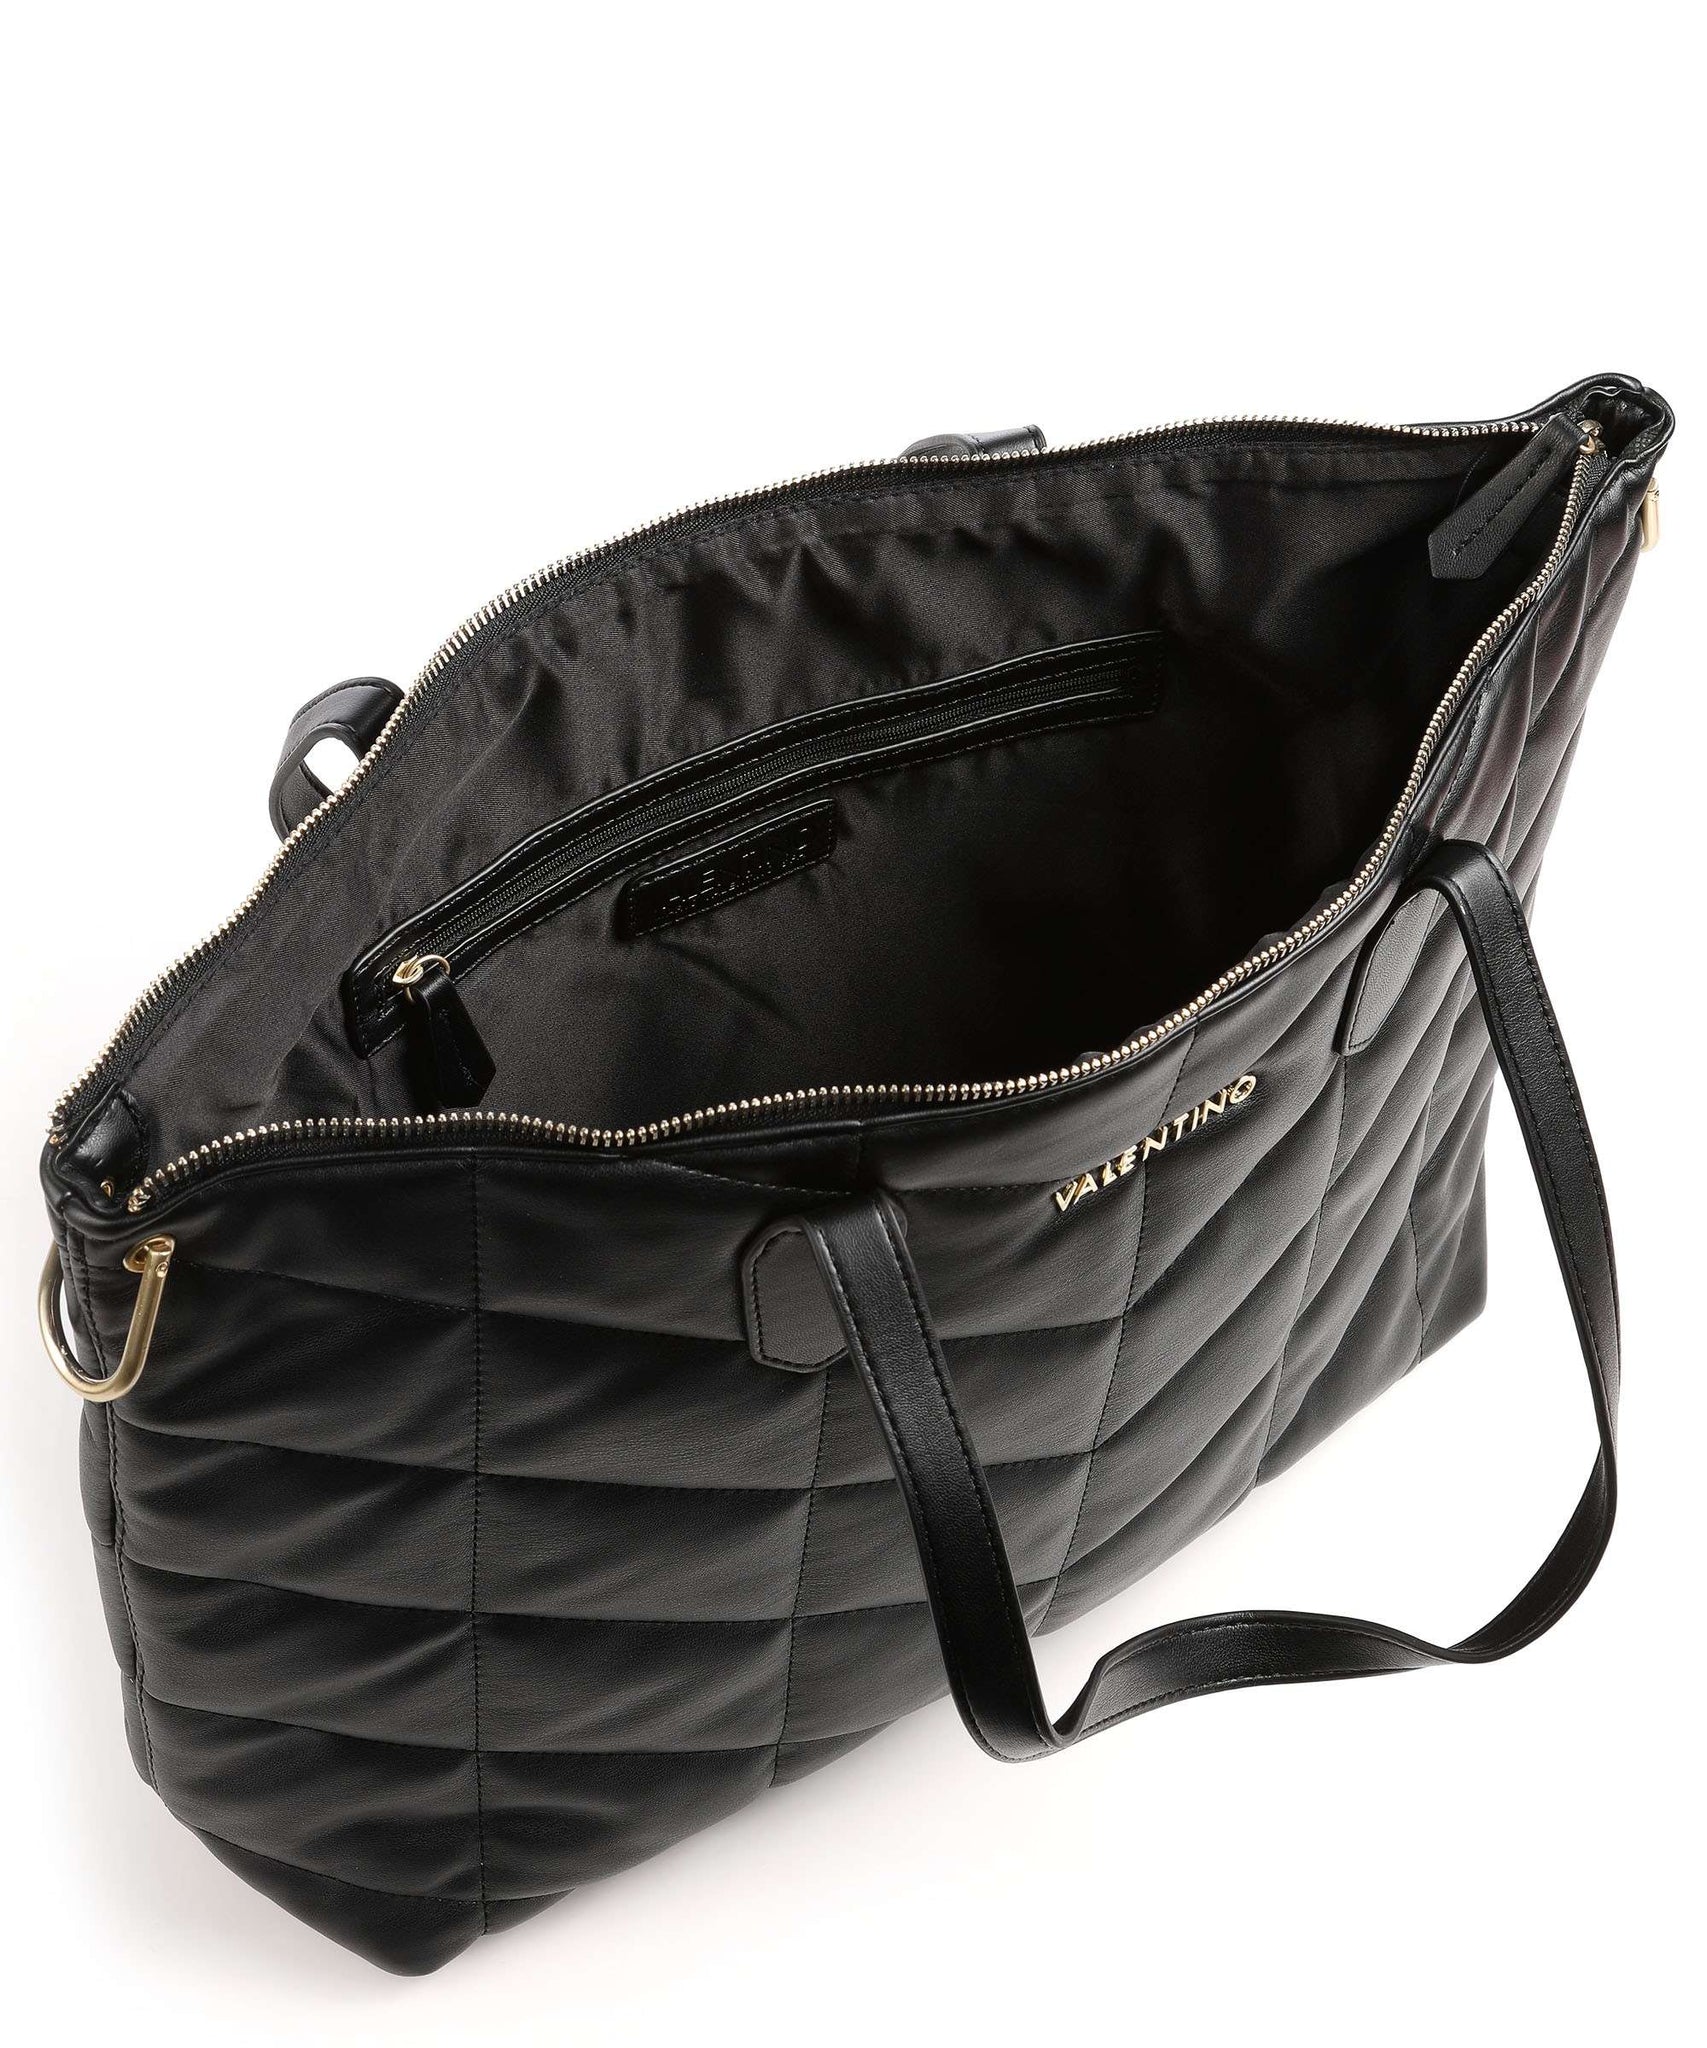 Valentino Bags Bamboo Quilted Tote Black | Bags Shoulder bags | Valentino Bags | Fashion2B